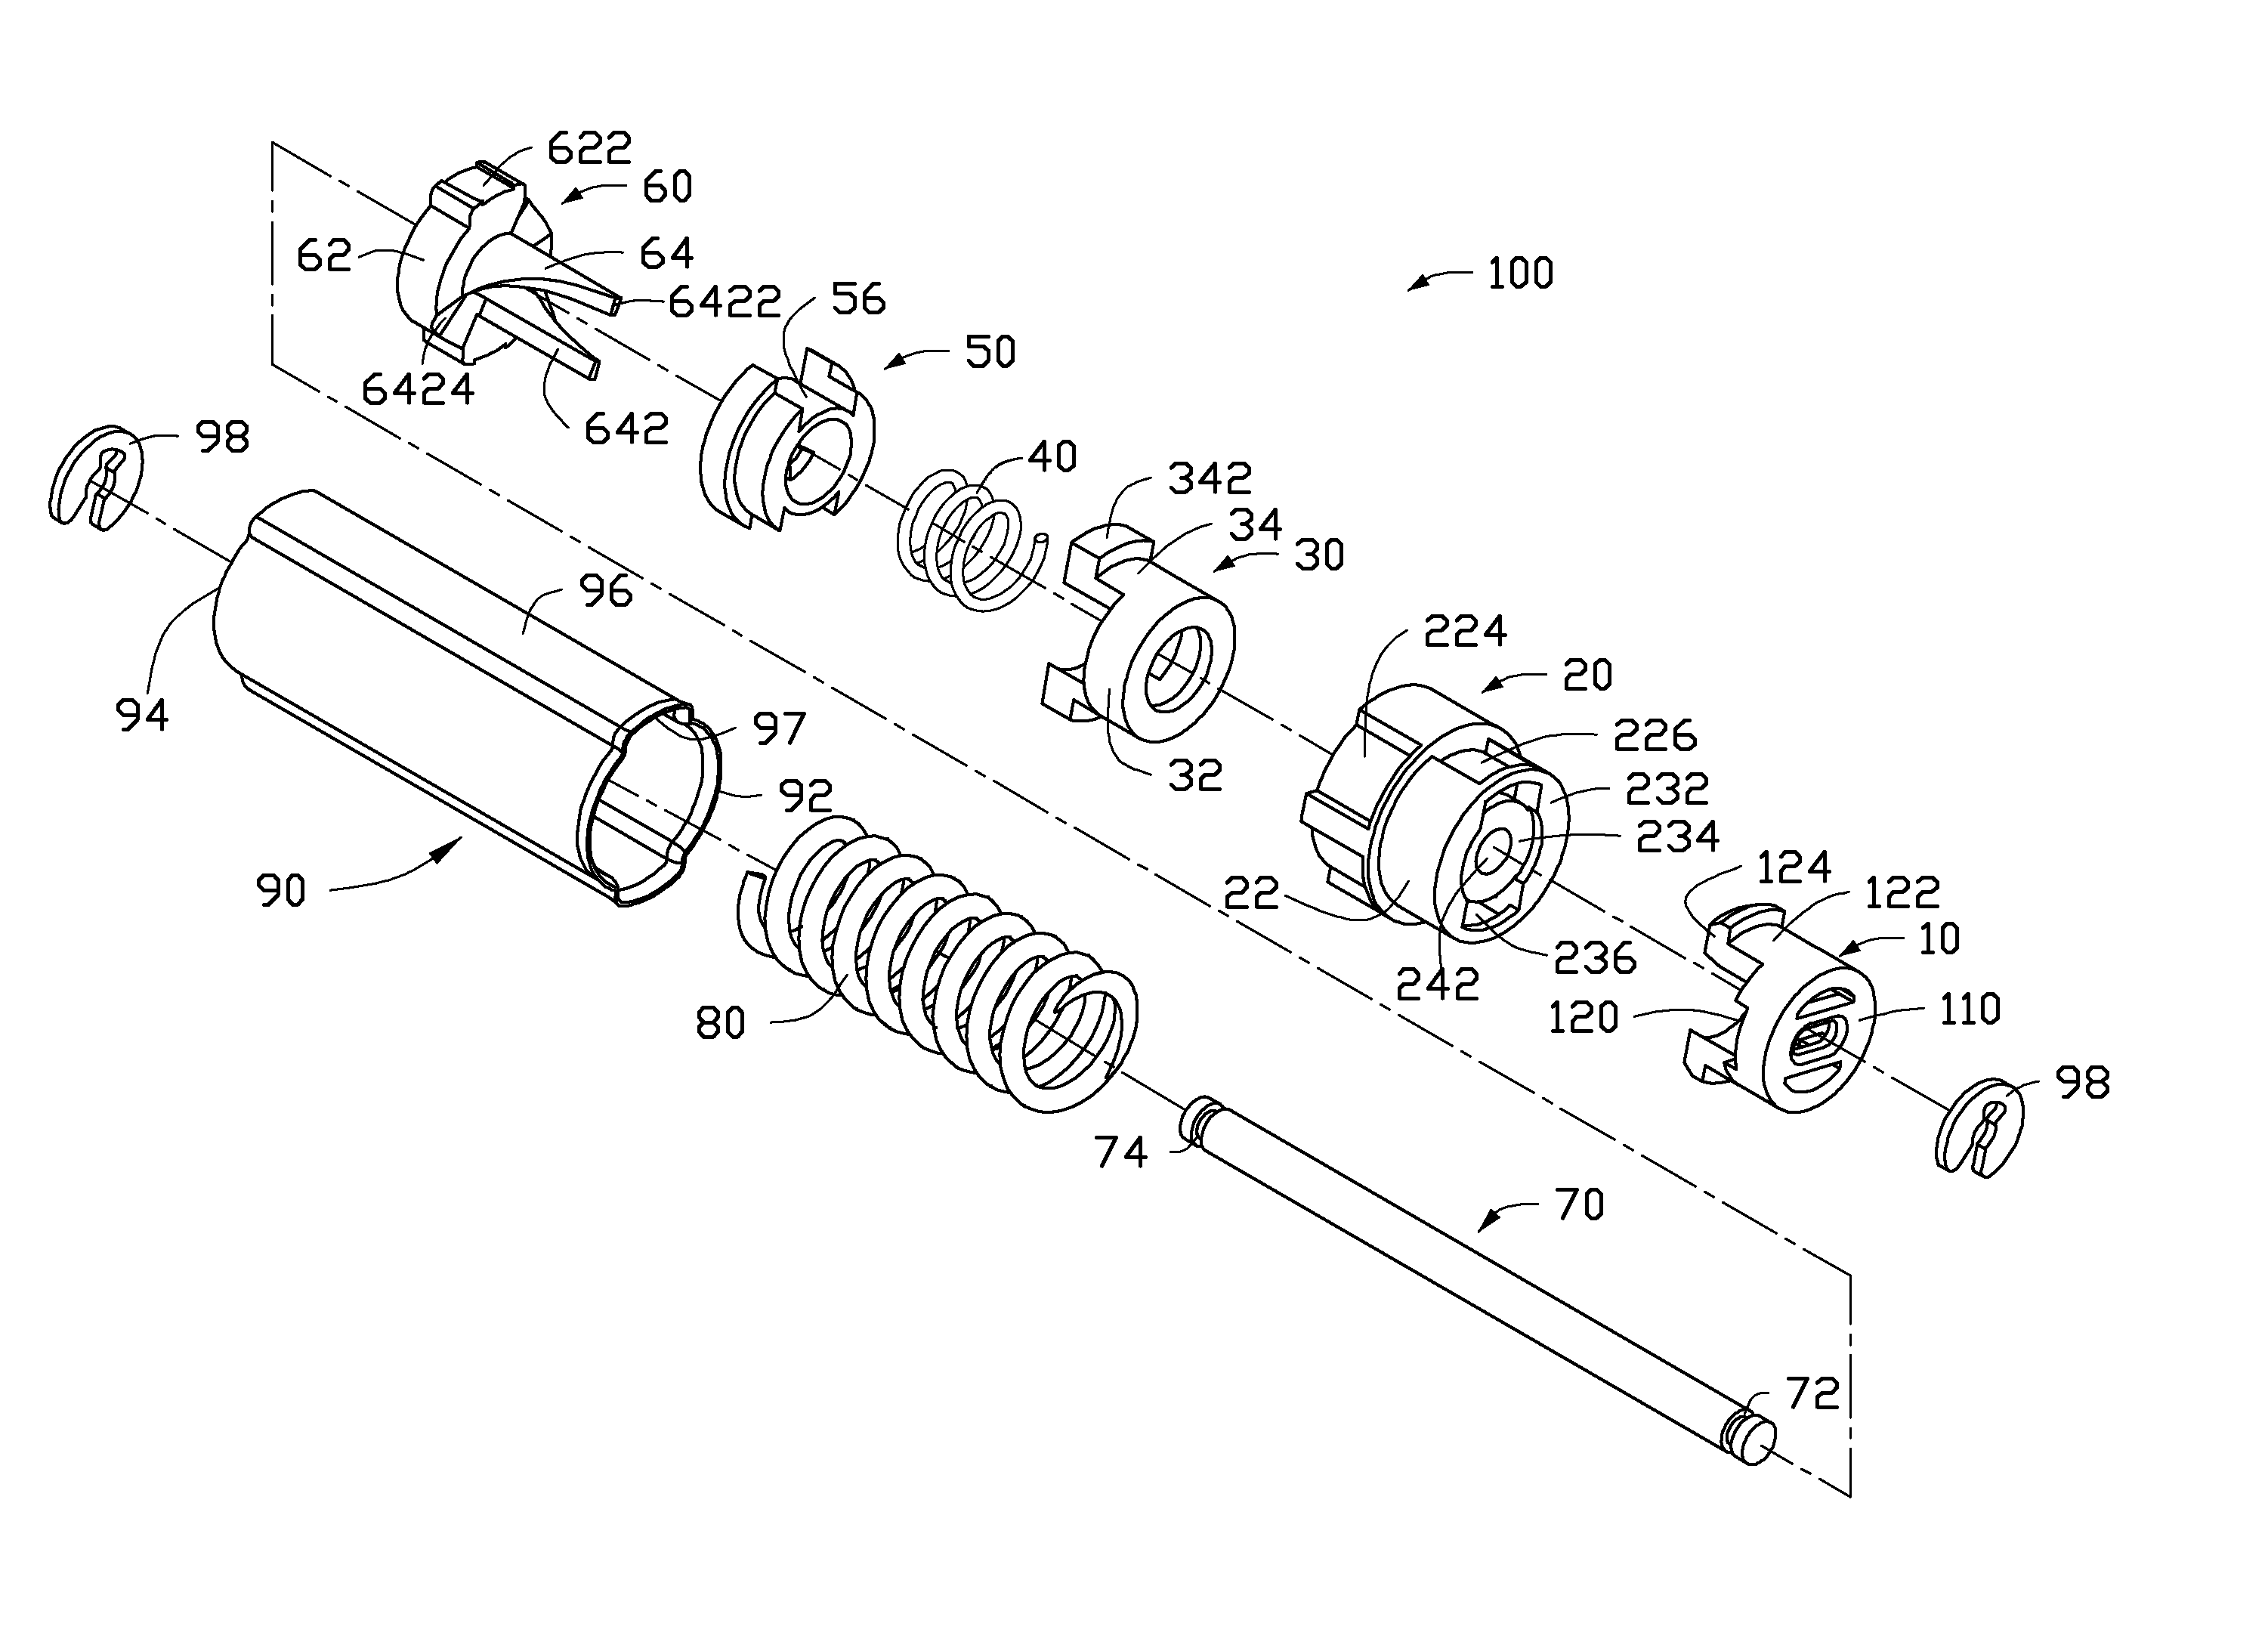 Button activated spring-loaded hinge assembly